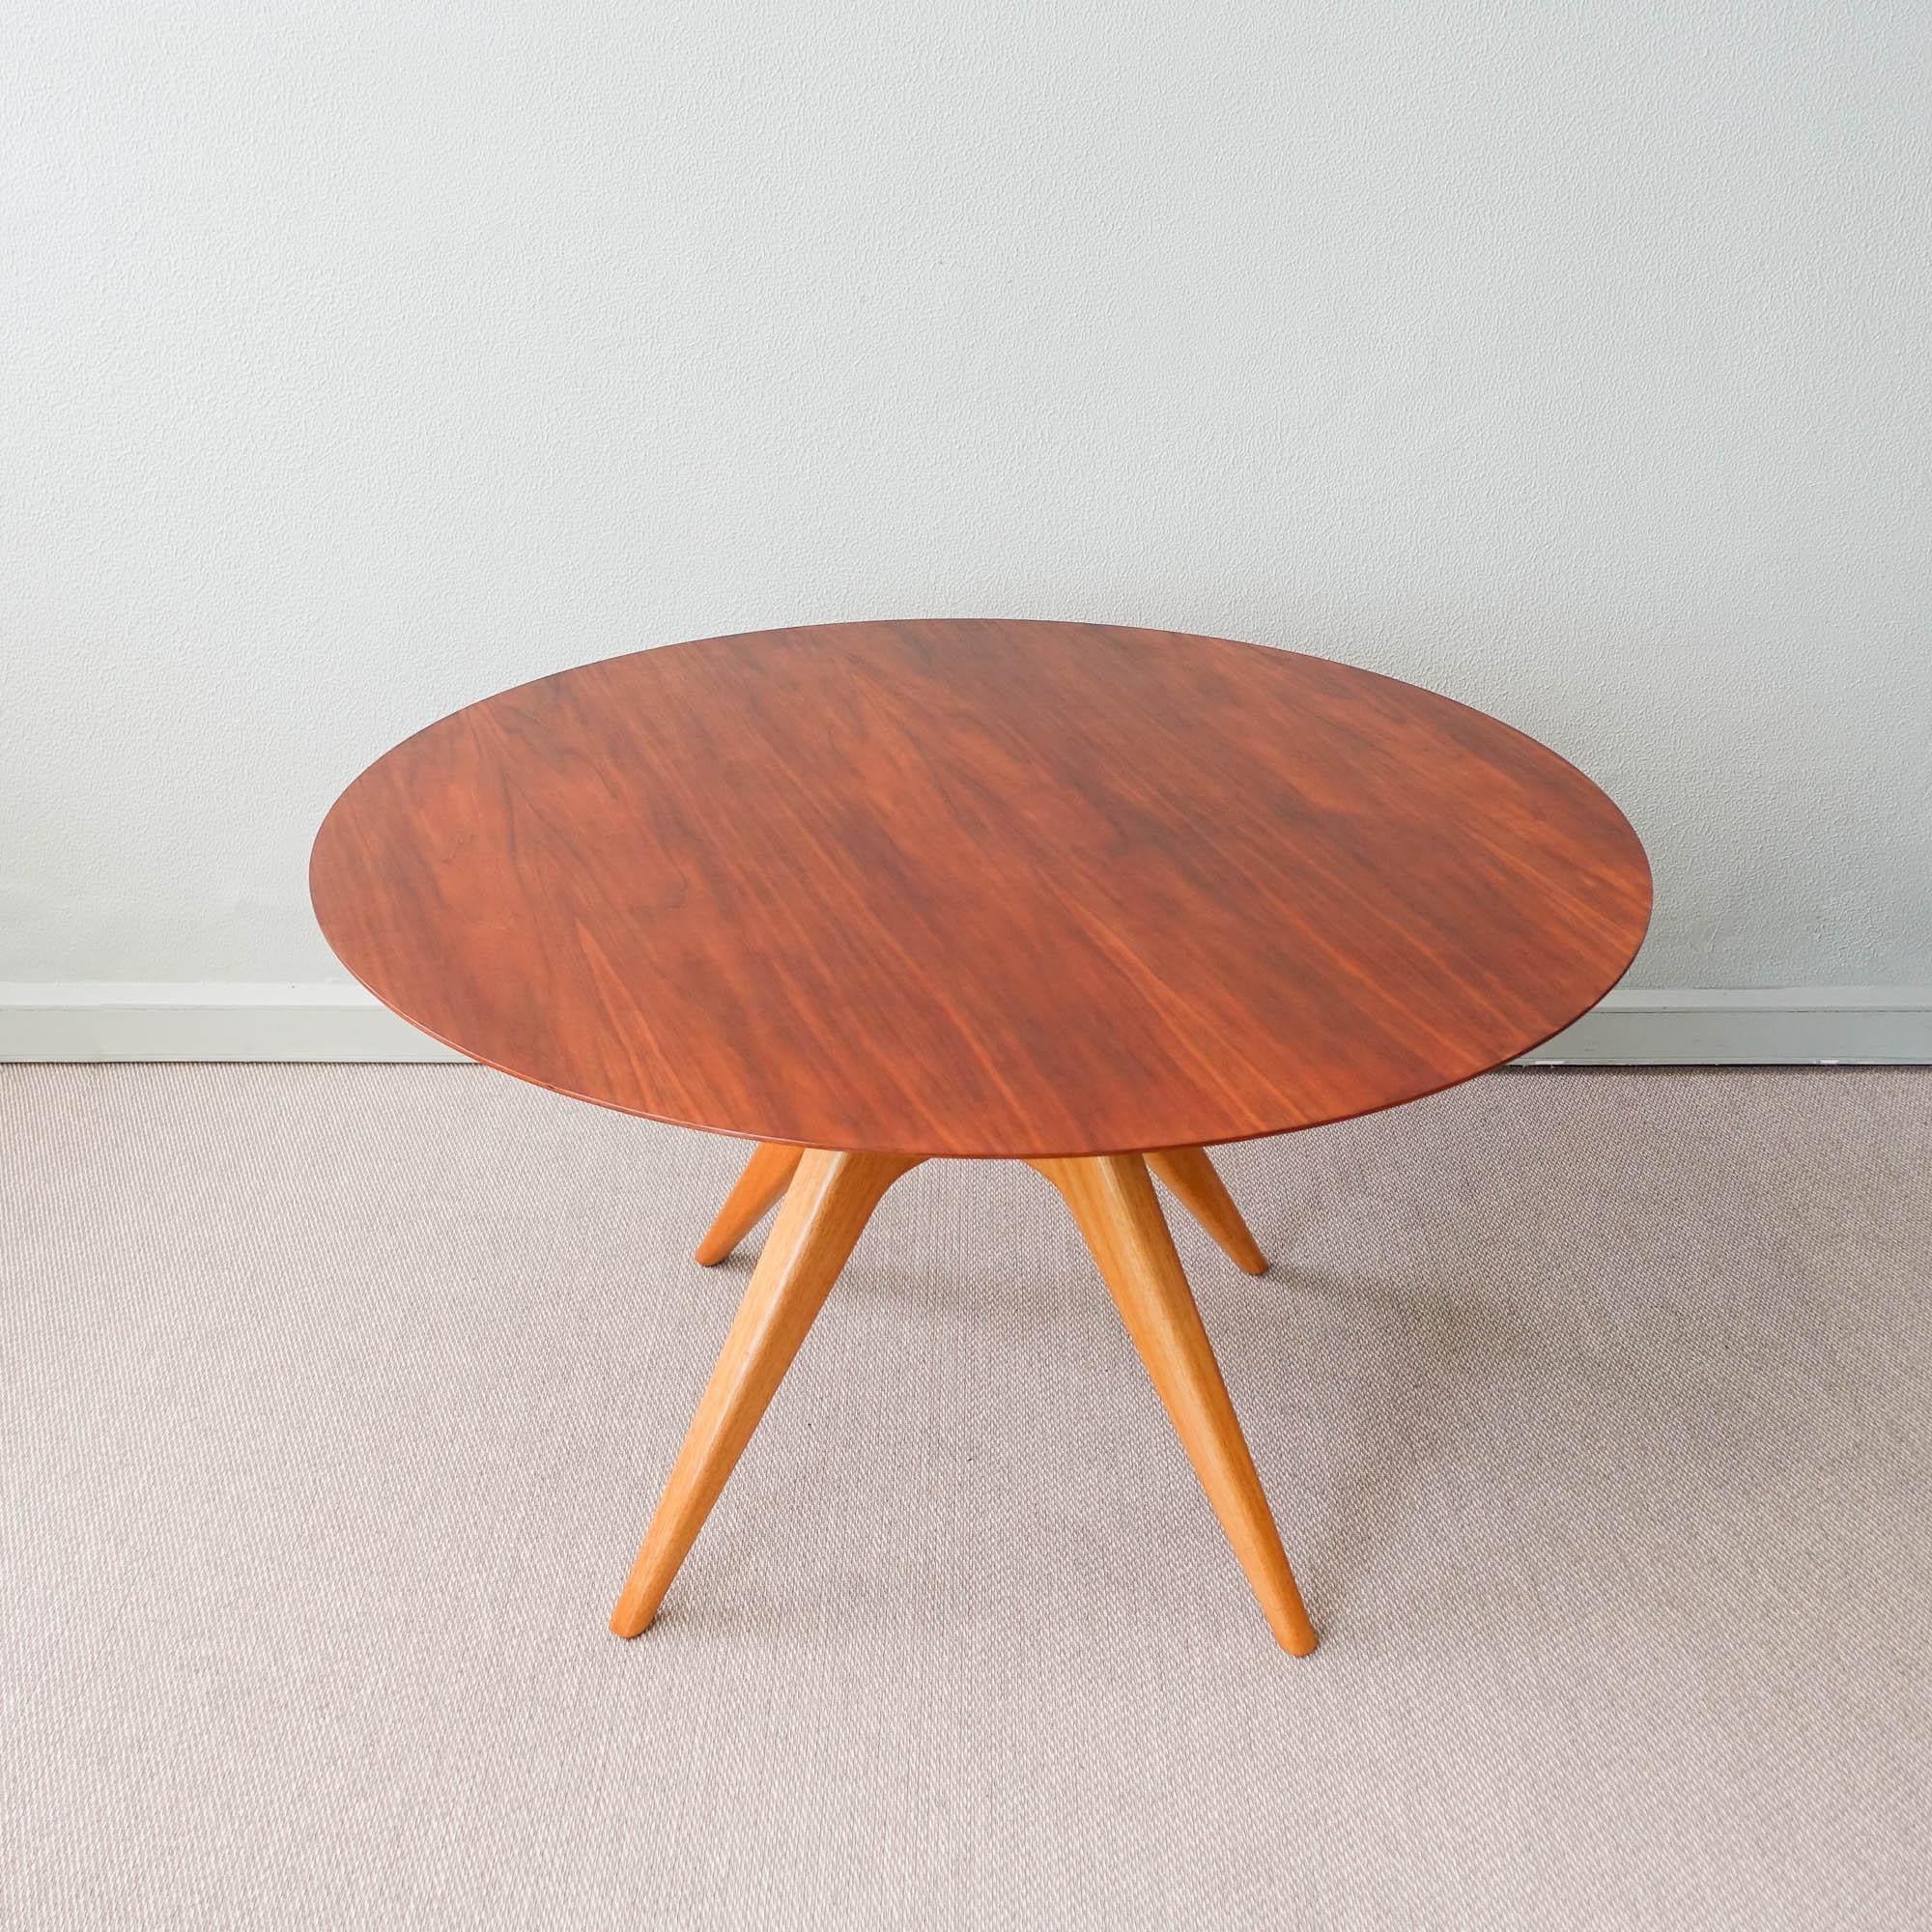 This dining table was designed and produced by Schuster, in Brazil, during the 1950's. It features a solid oak central feet where the table top in exotic wood is set through a screw. It was completely restored.